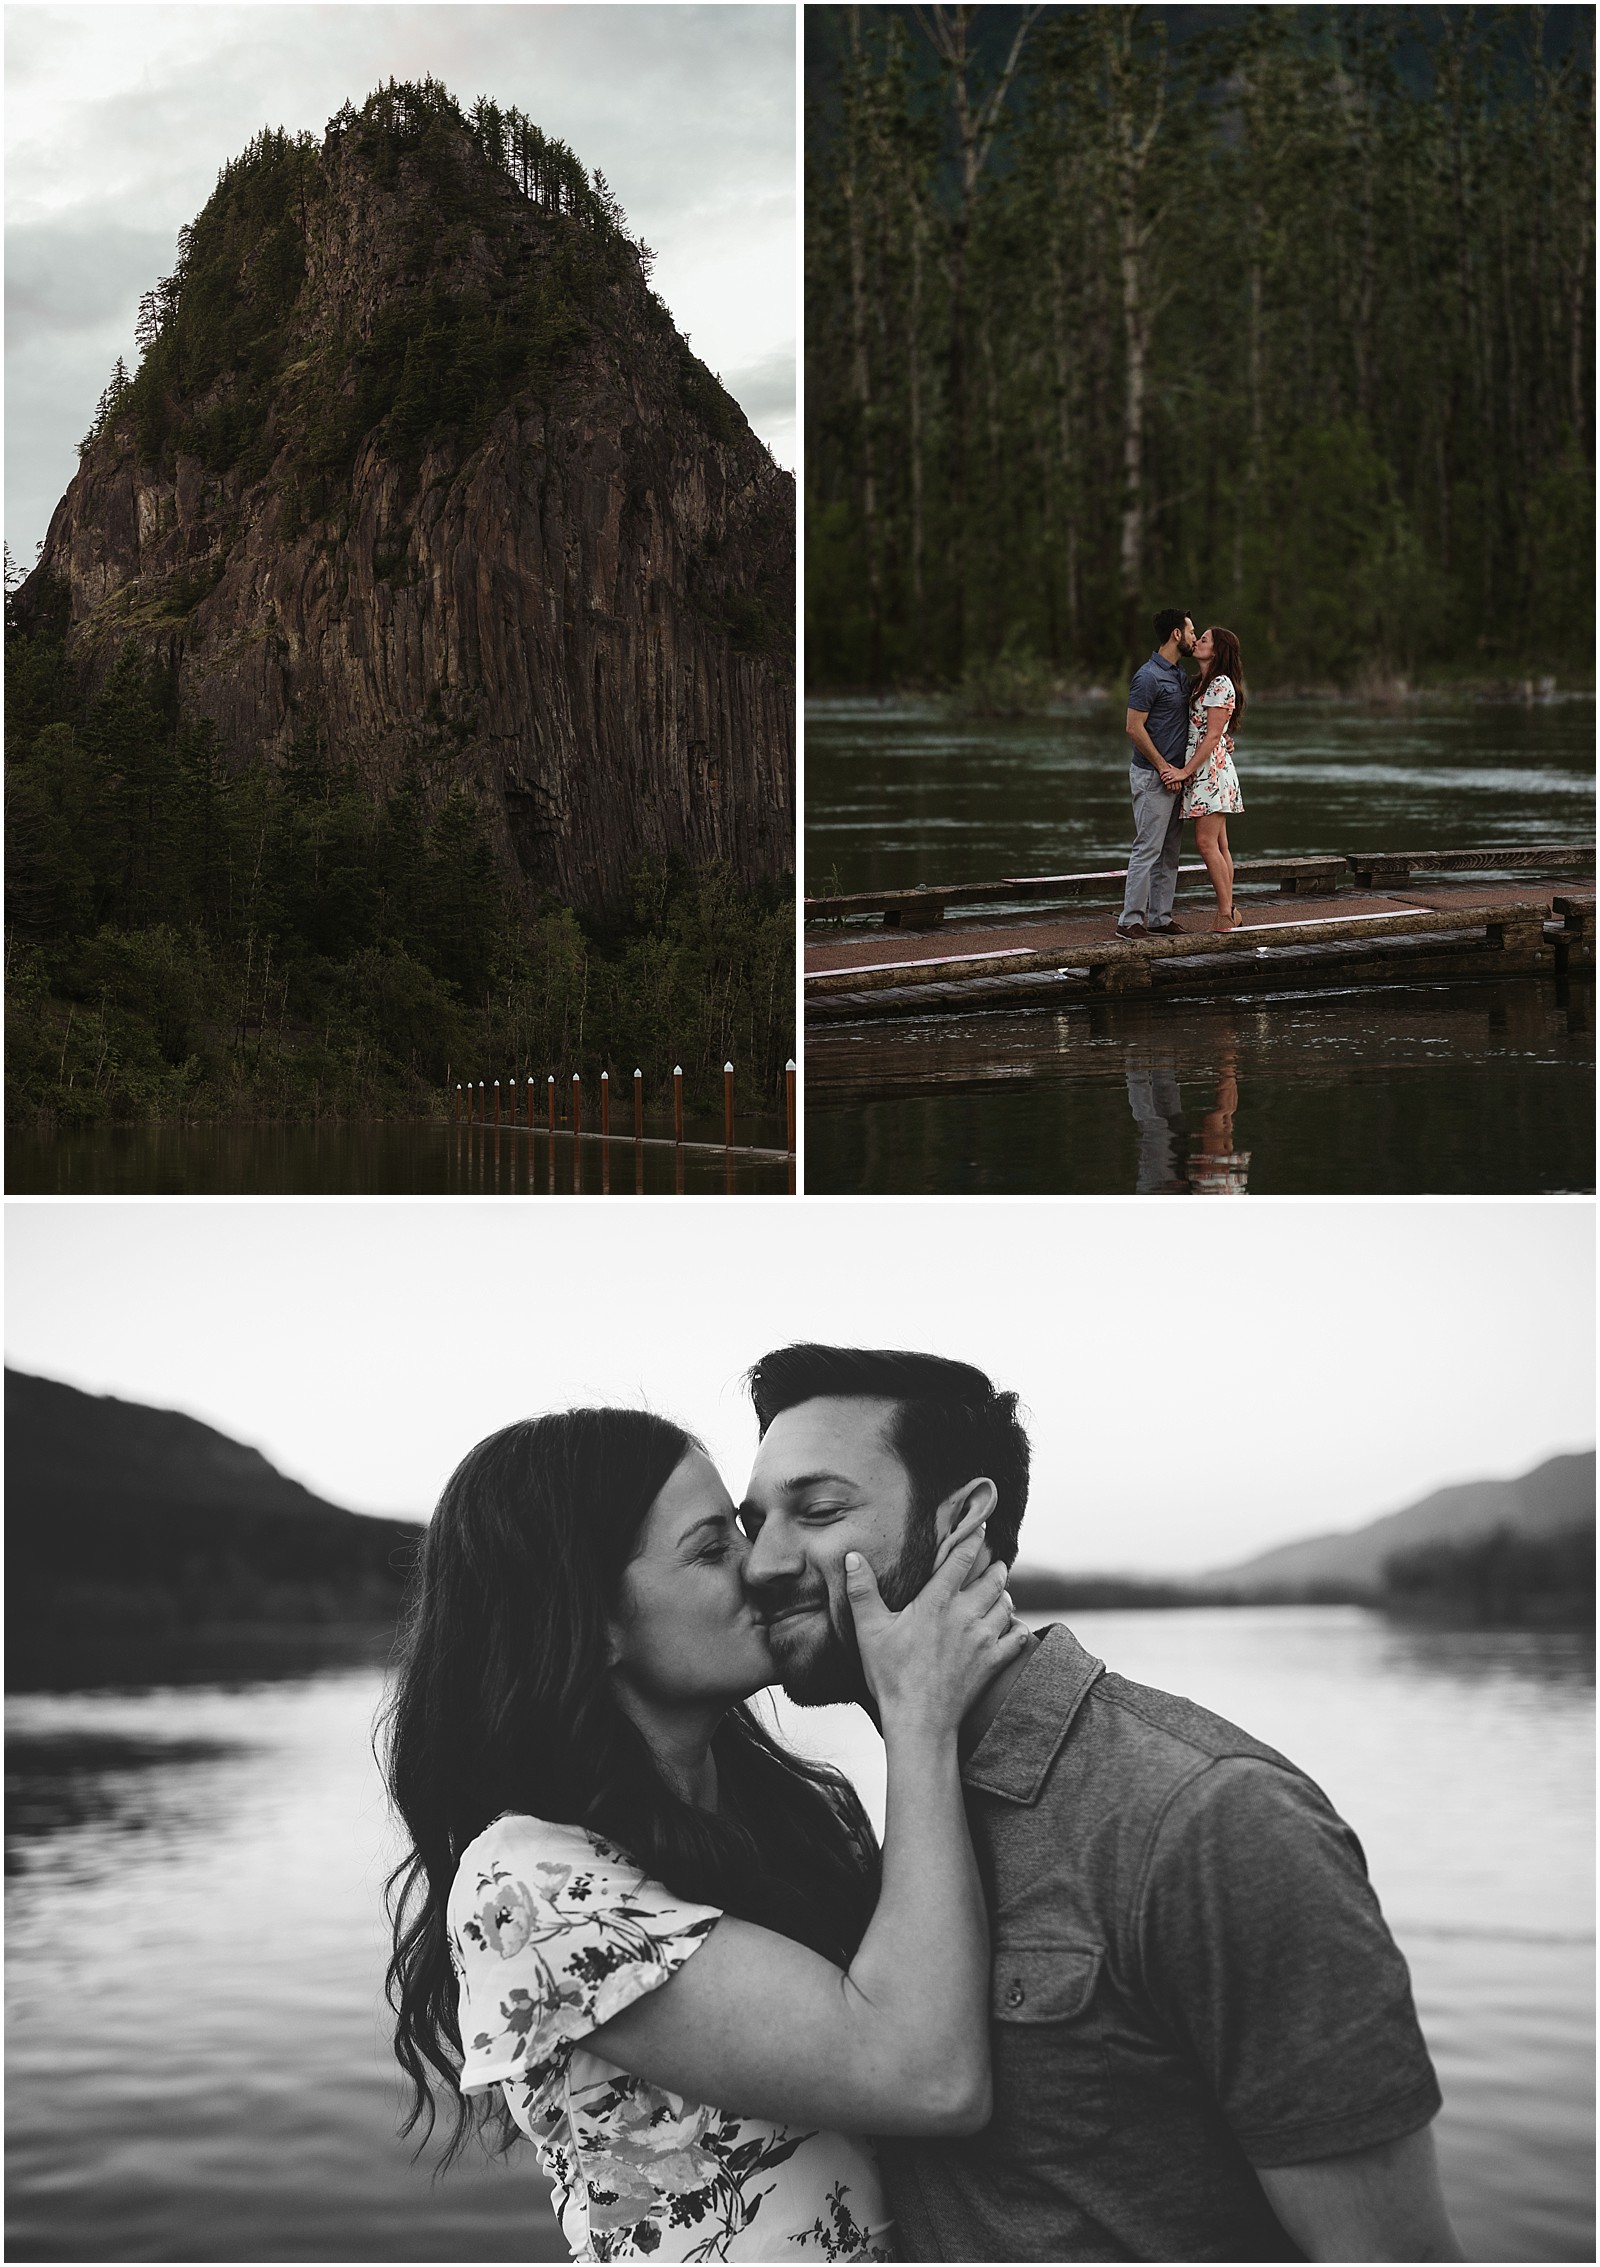 Romantic sunset engagement shoot on a dock in the Columbia River Gorge